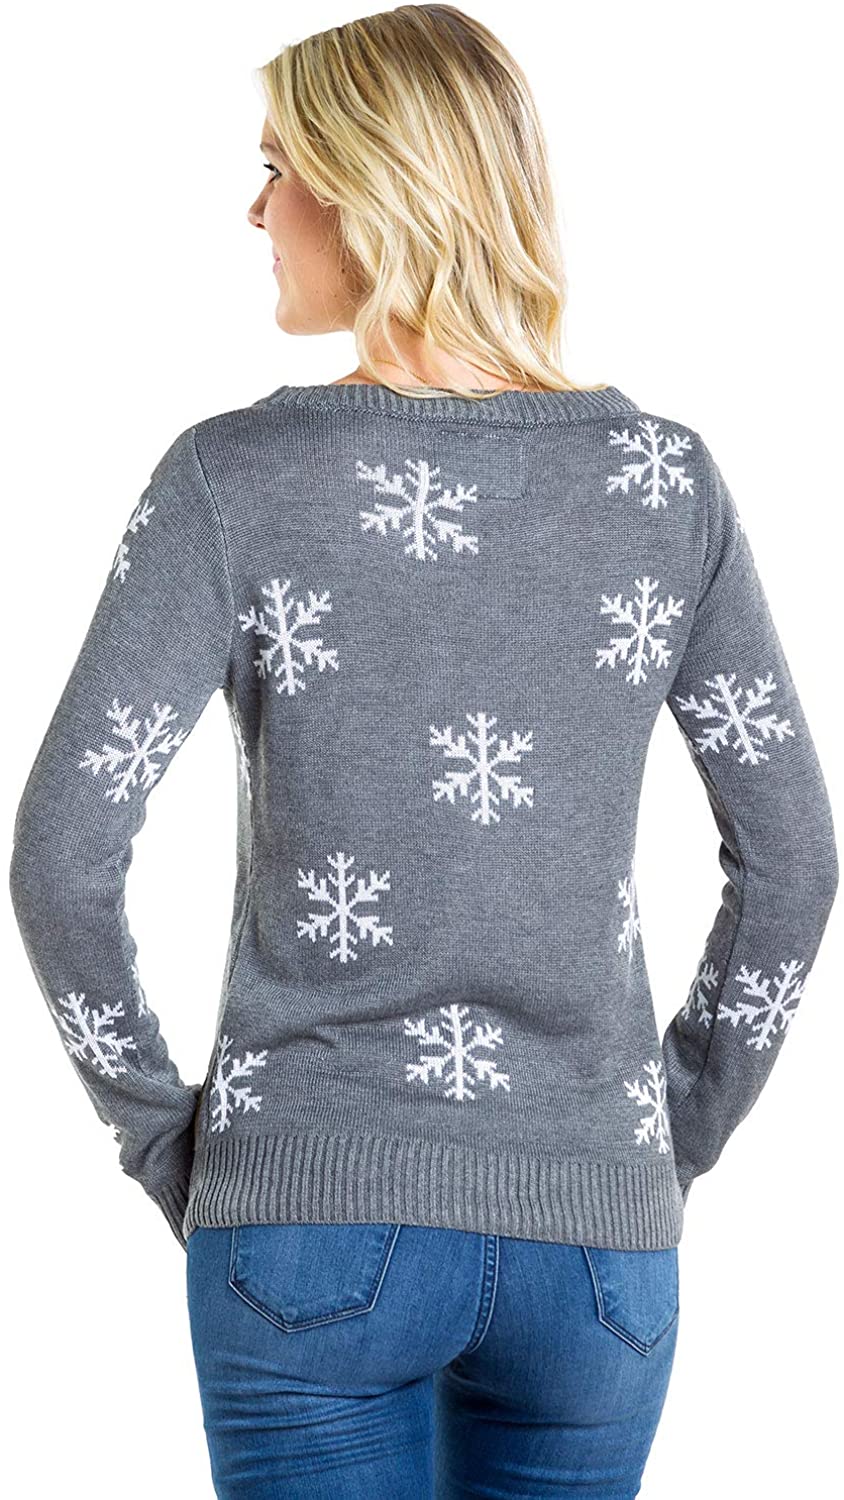 let it snow sweater gray sequins